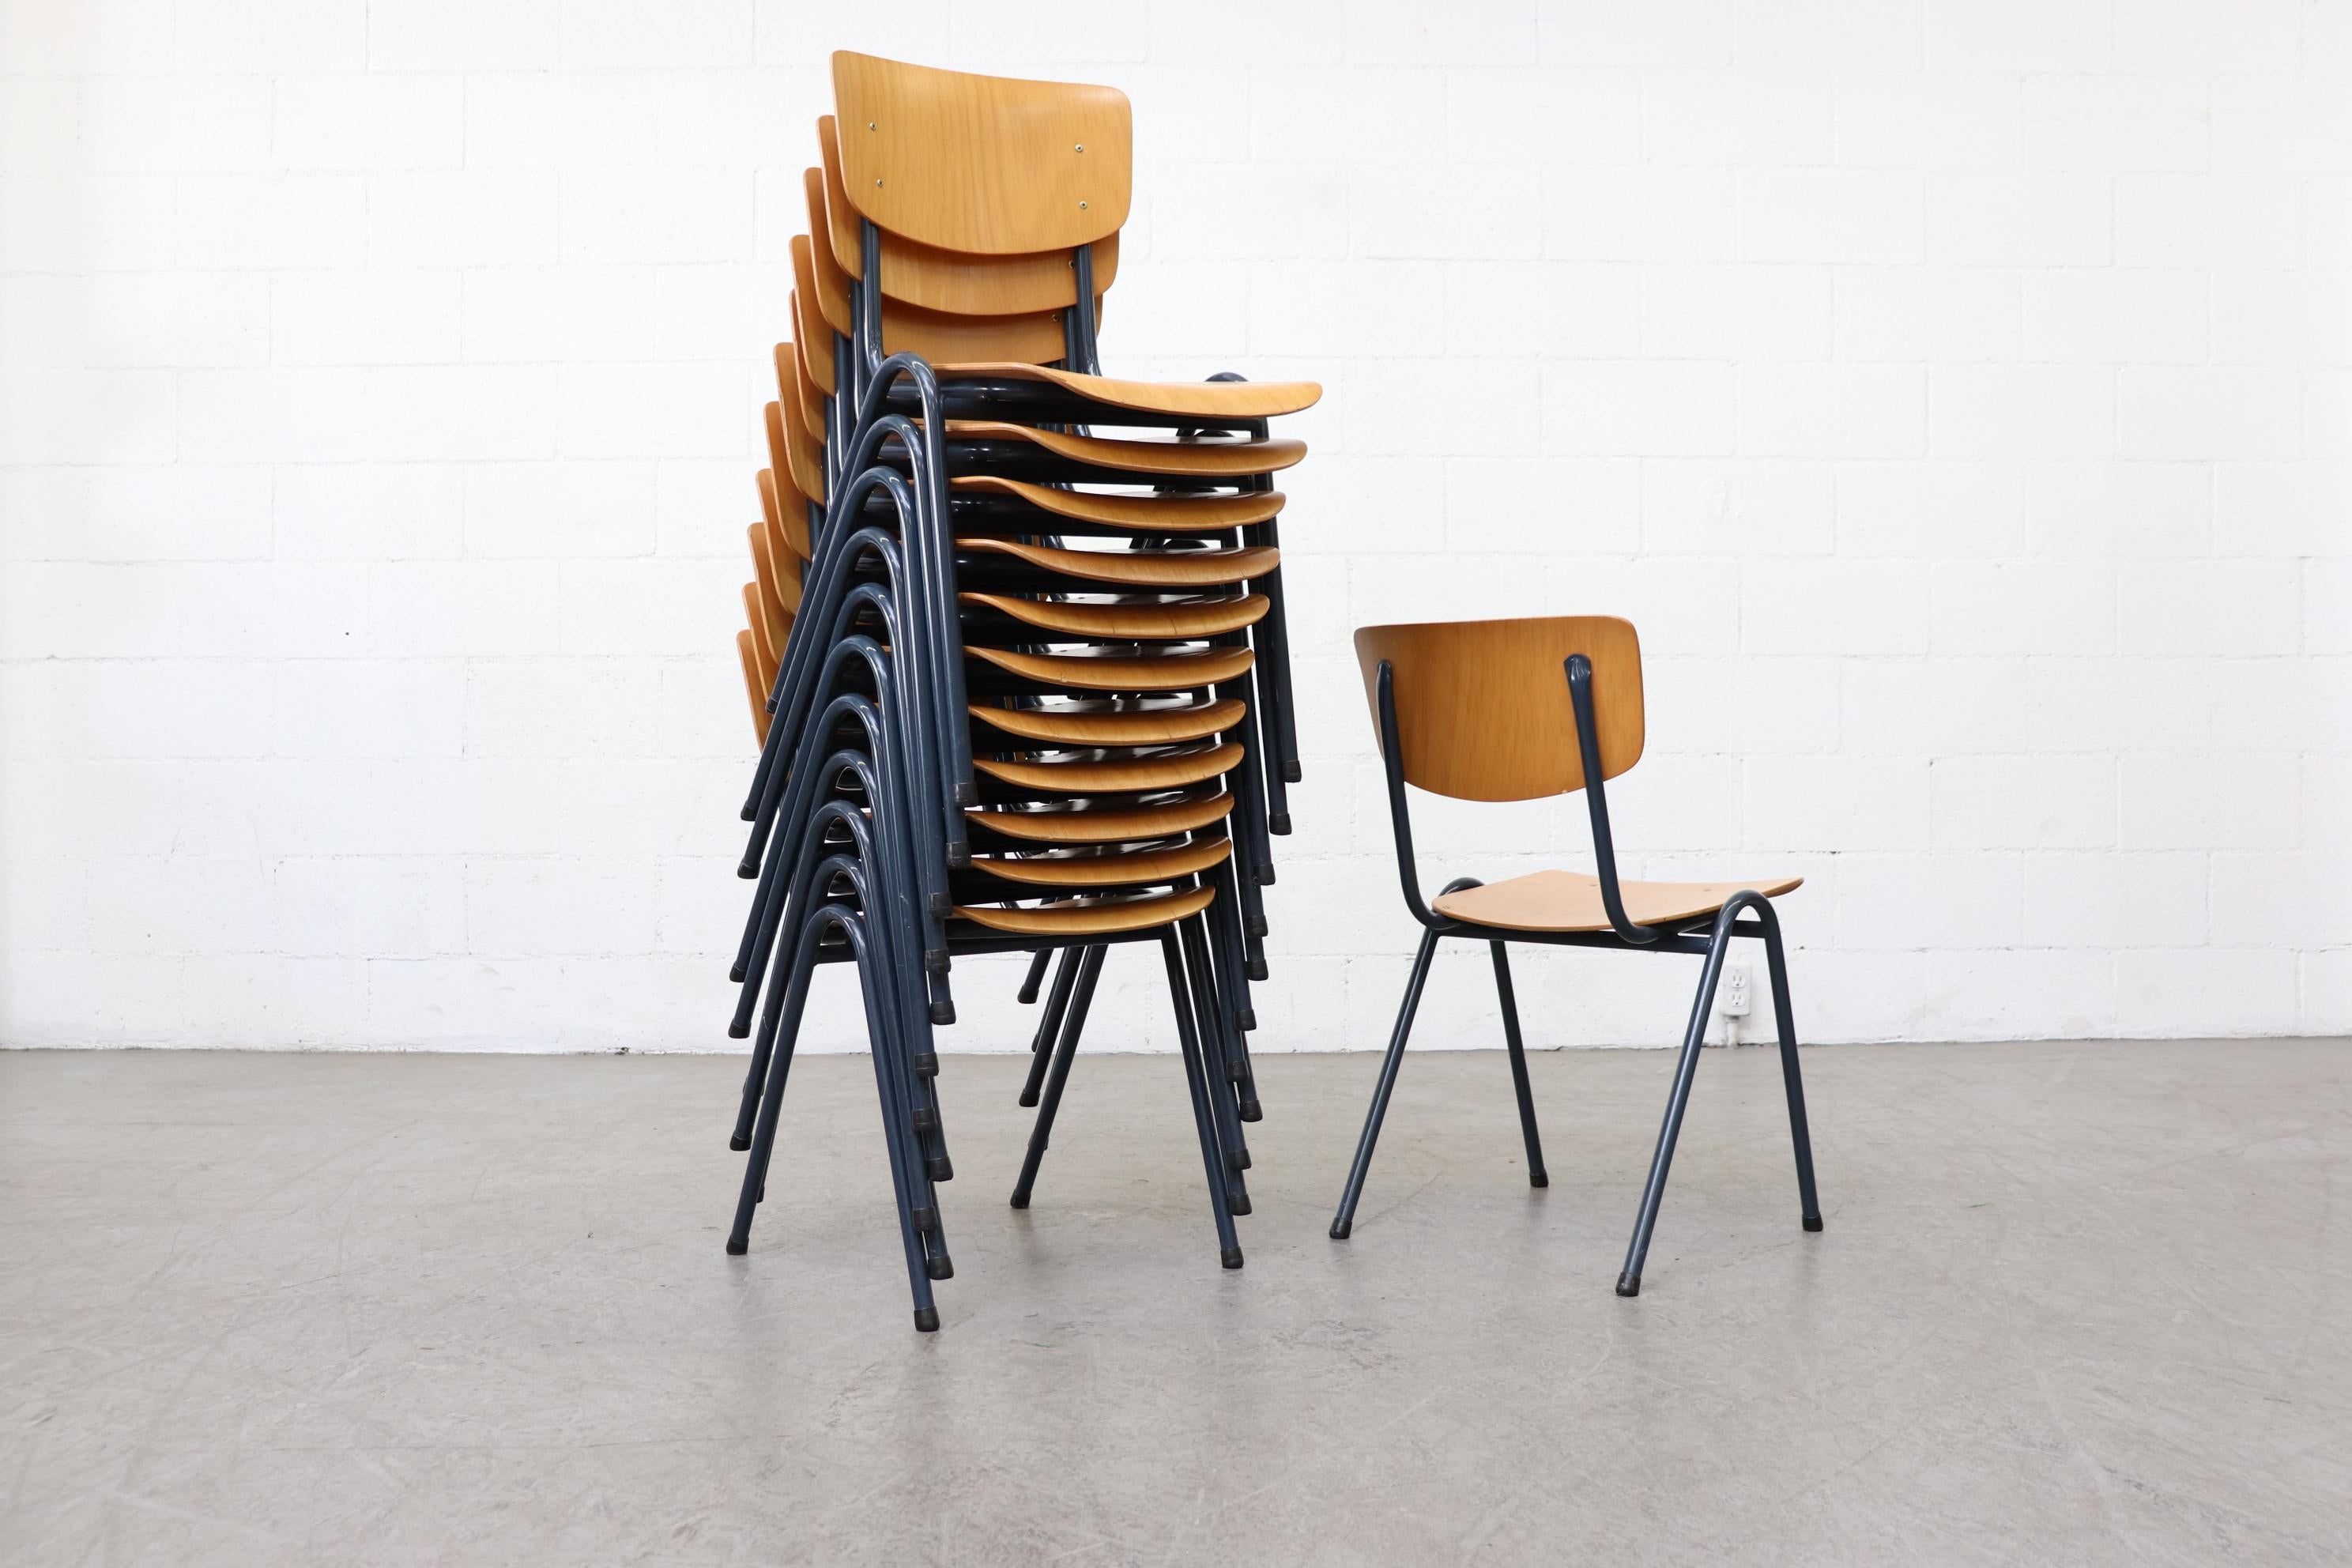 Dutch Set of 6 Blonde Plywood Industrial Stacking Chairs with Blue-Grey Enameled Metal